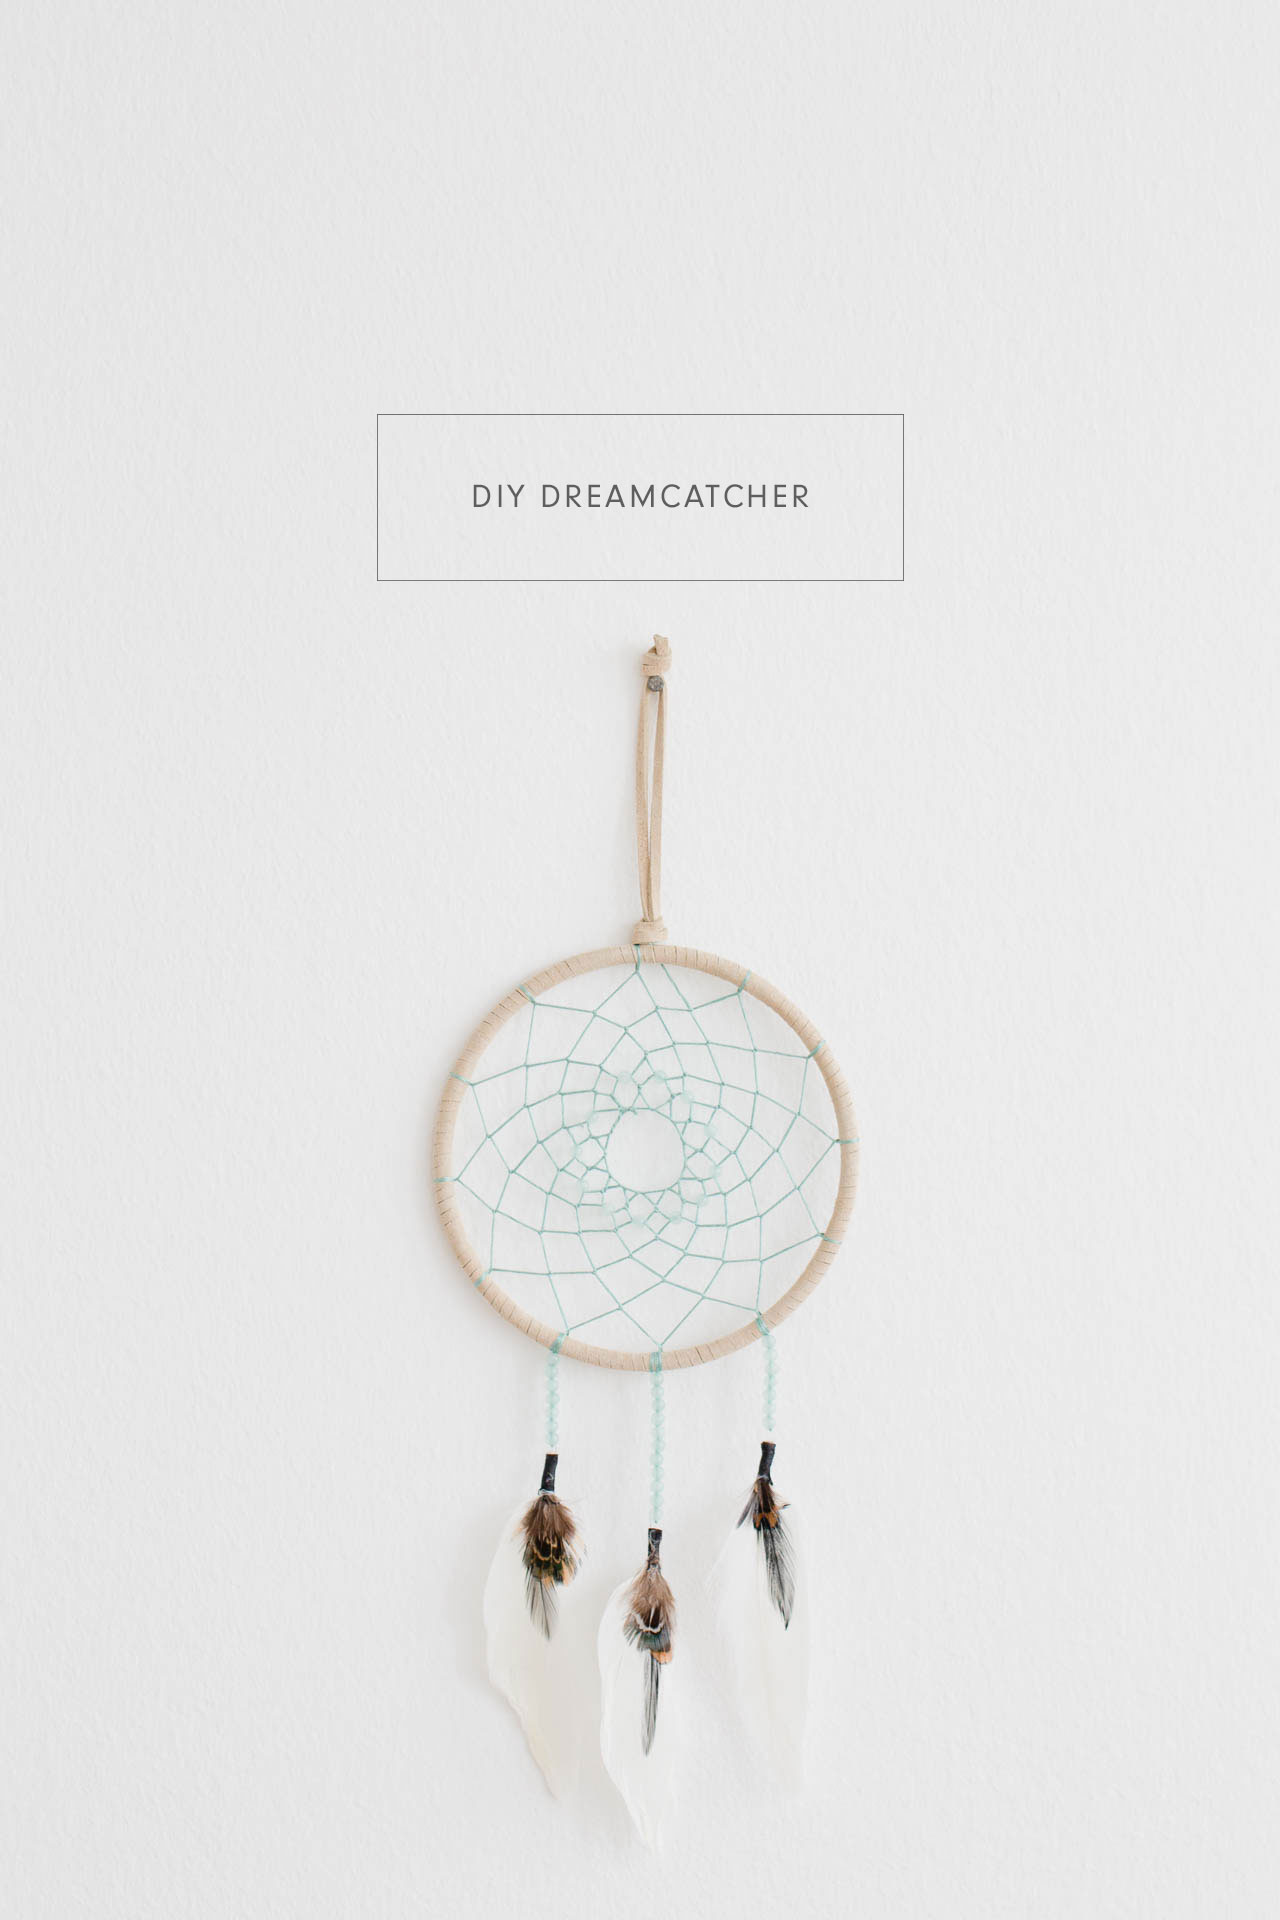 Kit to Make 1 Large Wooden Dream Catcher